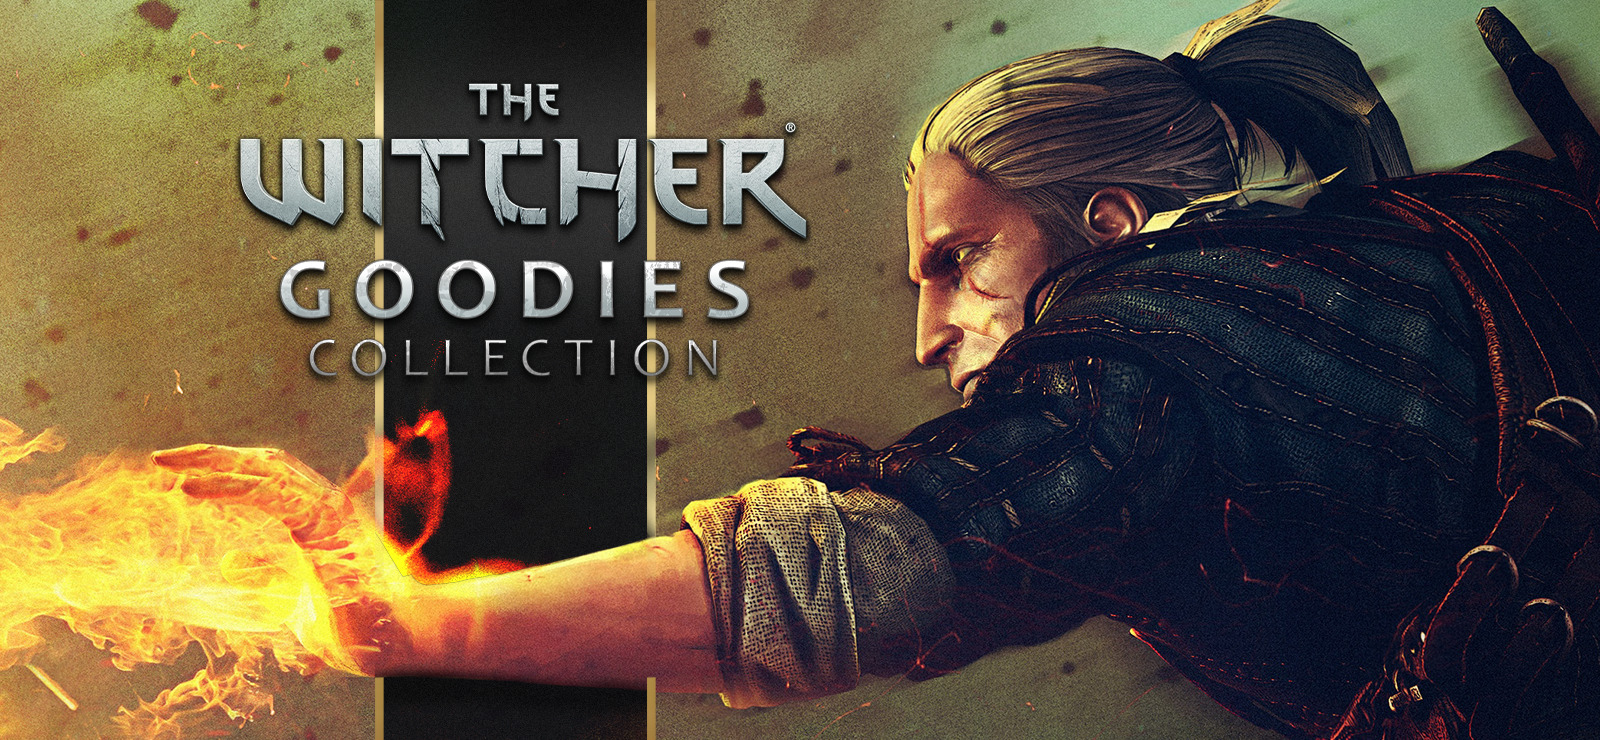 The Witcher - Goodies Collection GOG CD Key [USD 2.54]